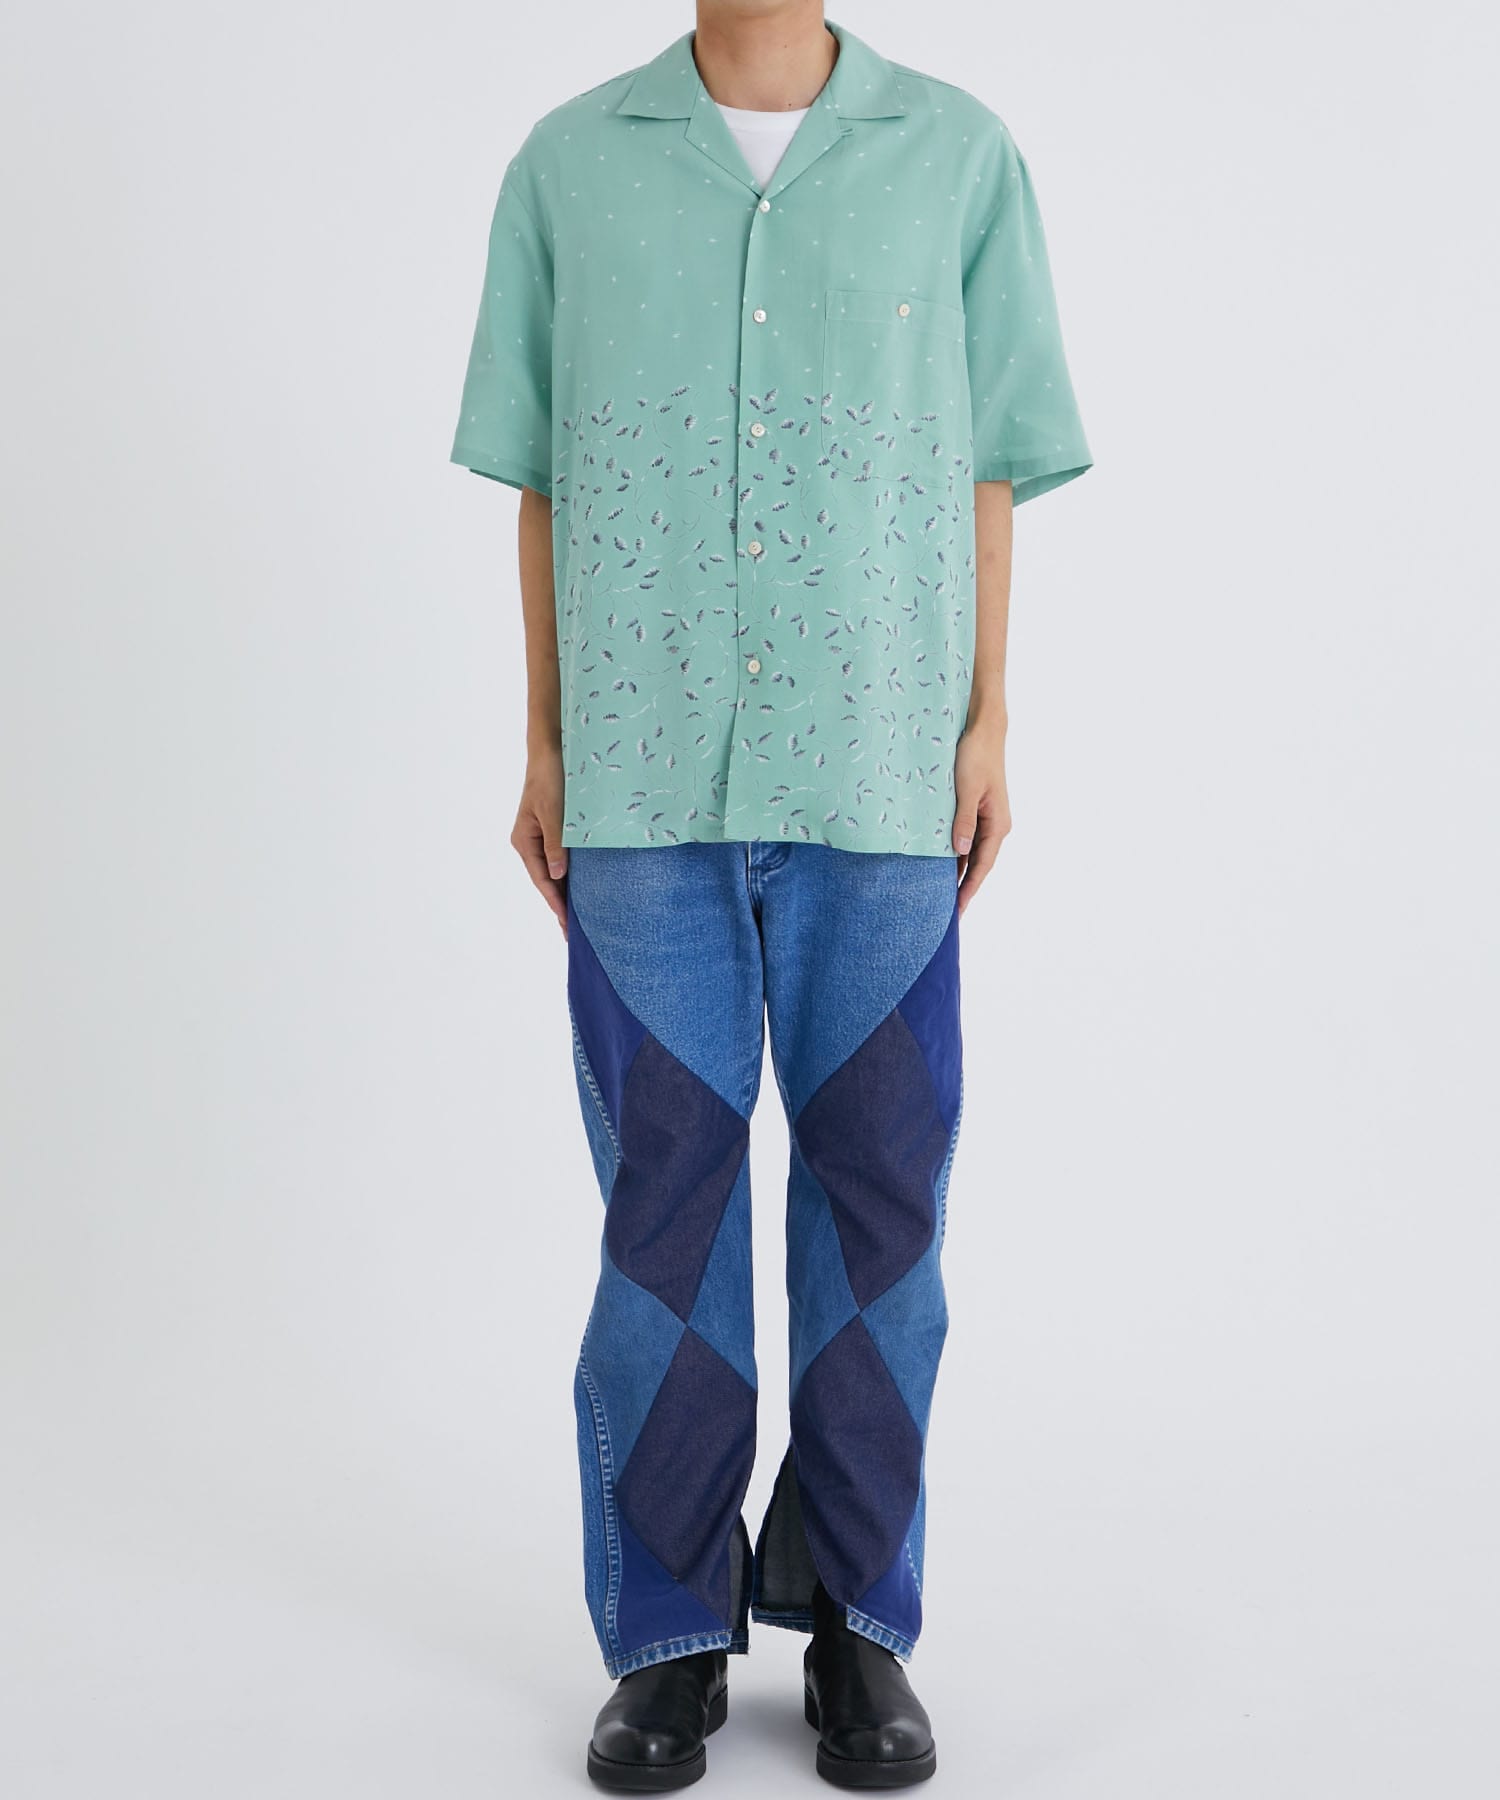 OPEN COLLAR SHIRTS S/S SEVEN BY SEVEN